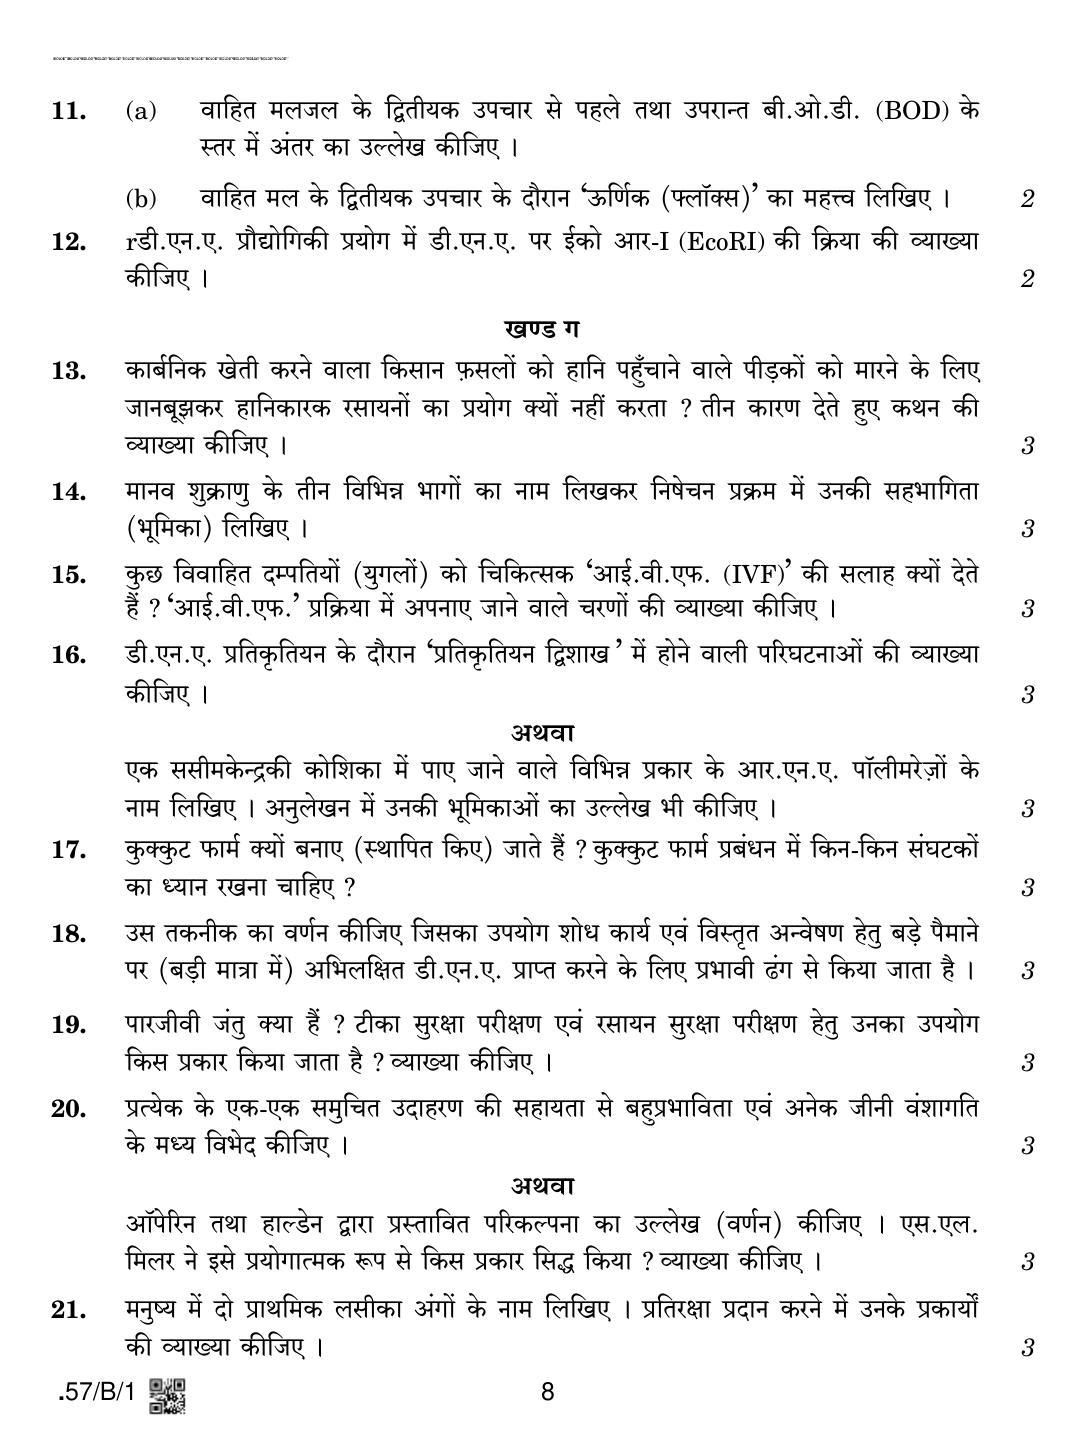 CBSE Class 12 57-C-1 - Biology 2020 Compartment Question Paper - Page 8